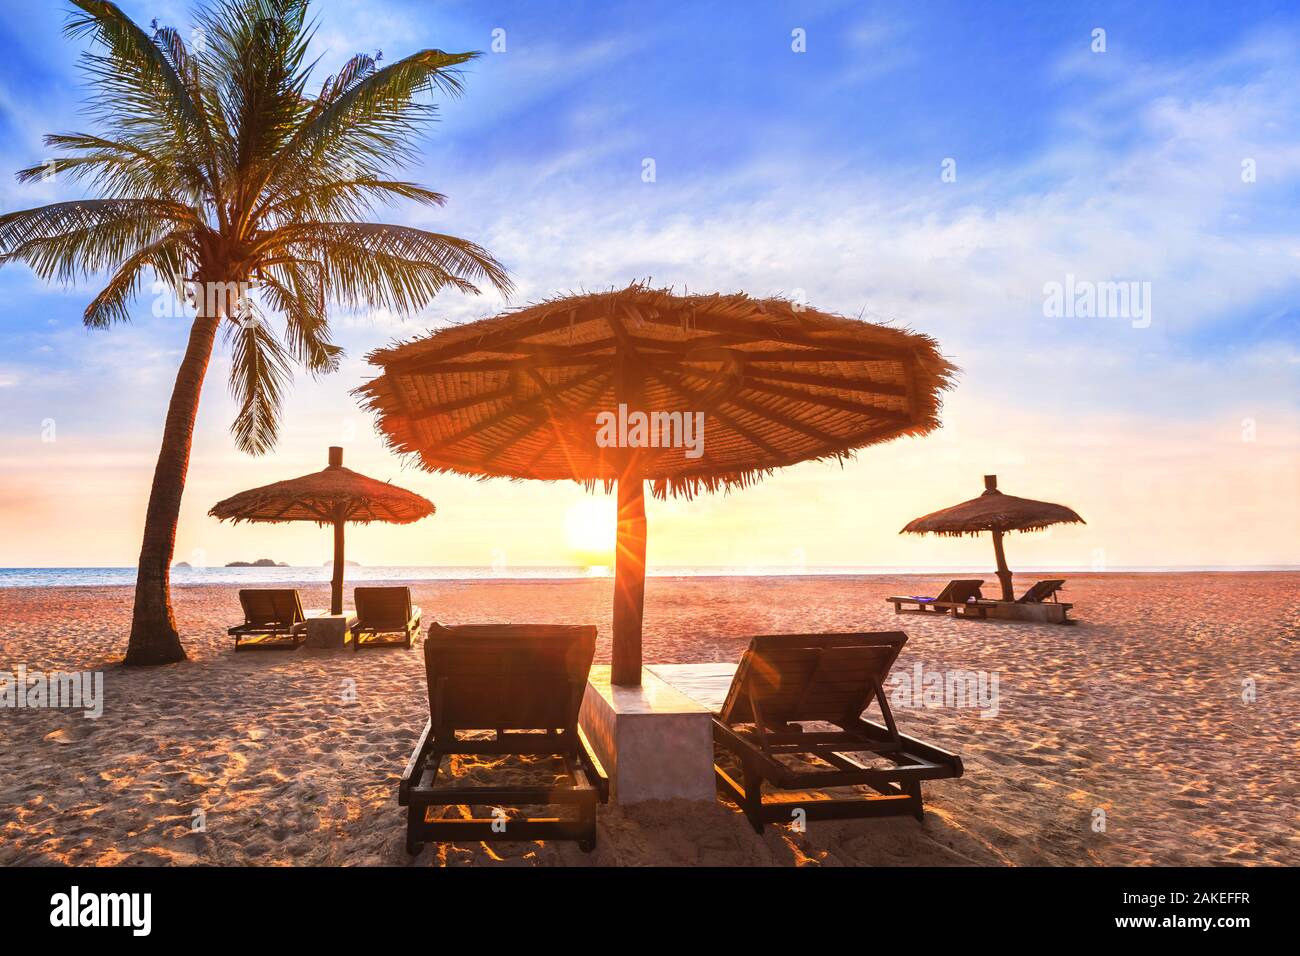 Tropical beach landscape at sunset, summer vacation holiday in paradise luxurious coastal hotel resort, palm tree, sun bed loungers and parasol on the Stock Photo